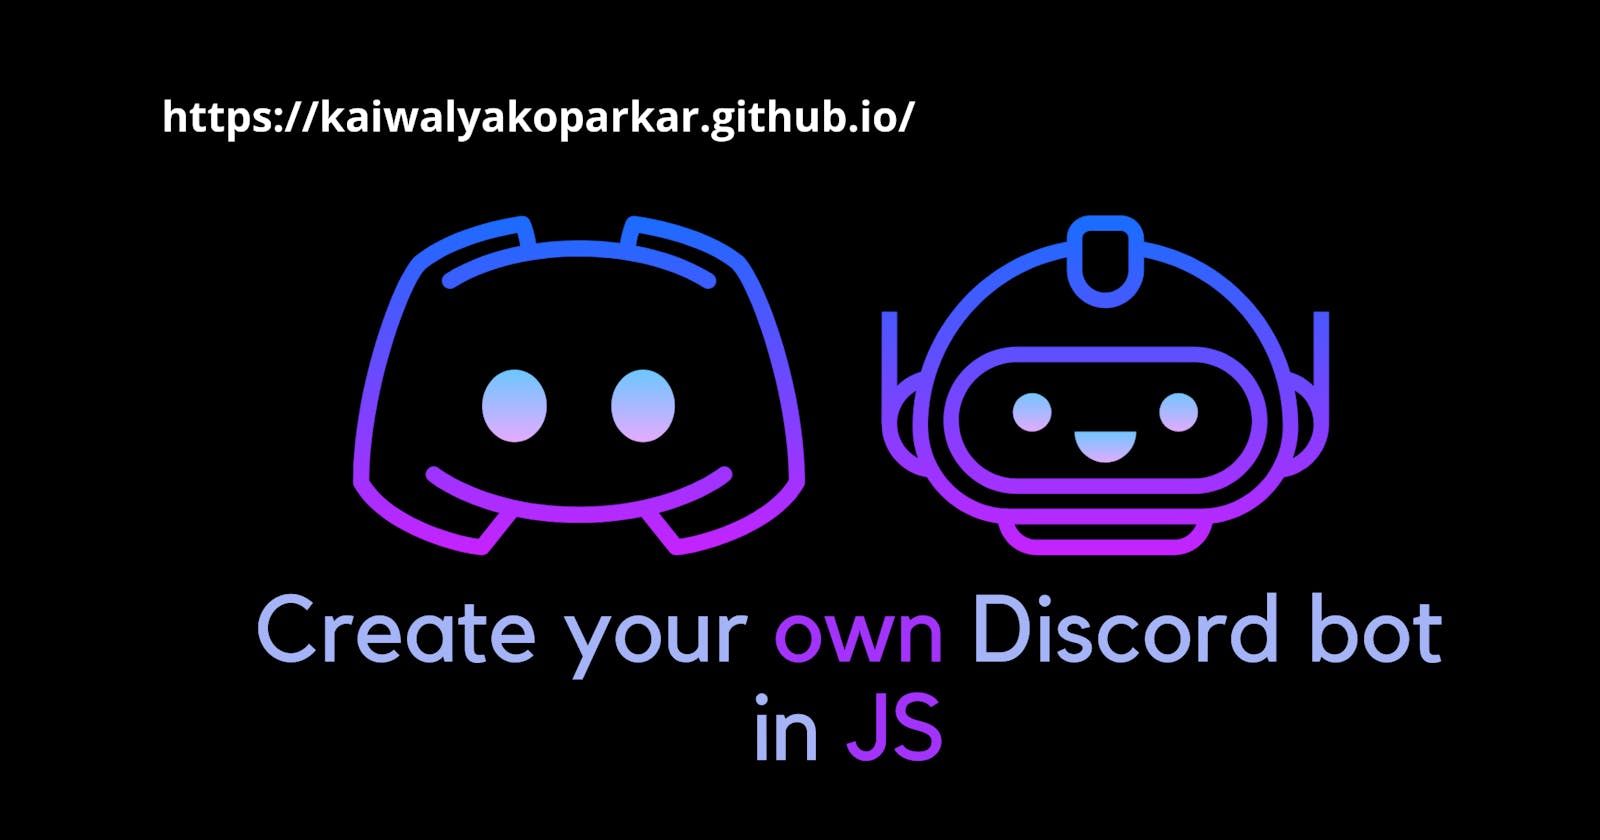 🤖 Creating your own discord bot using JS 🤖